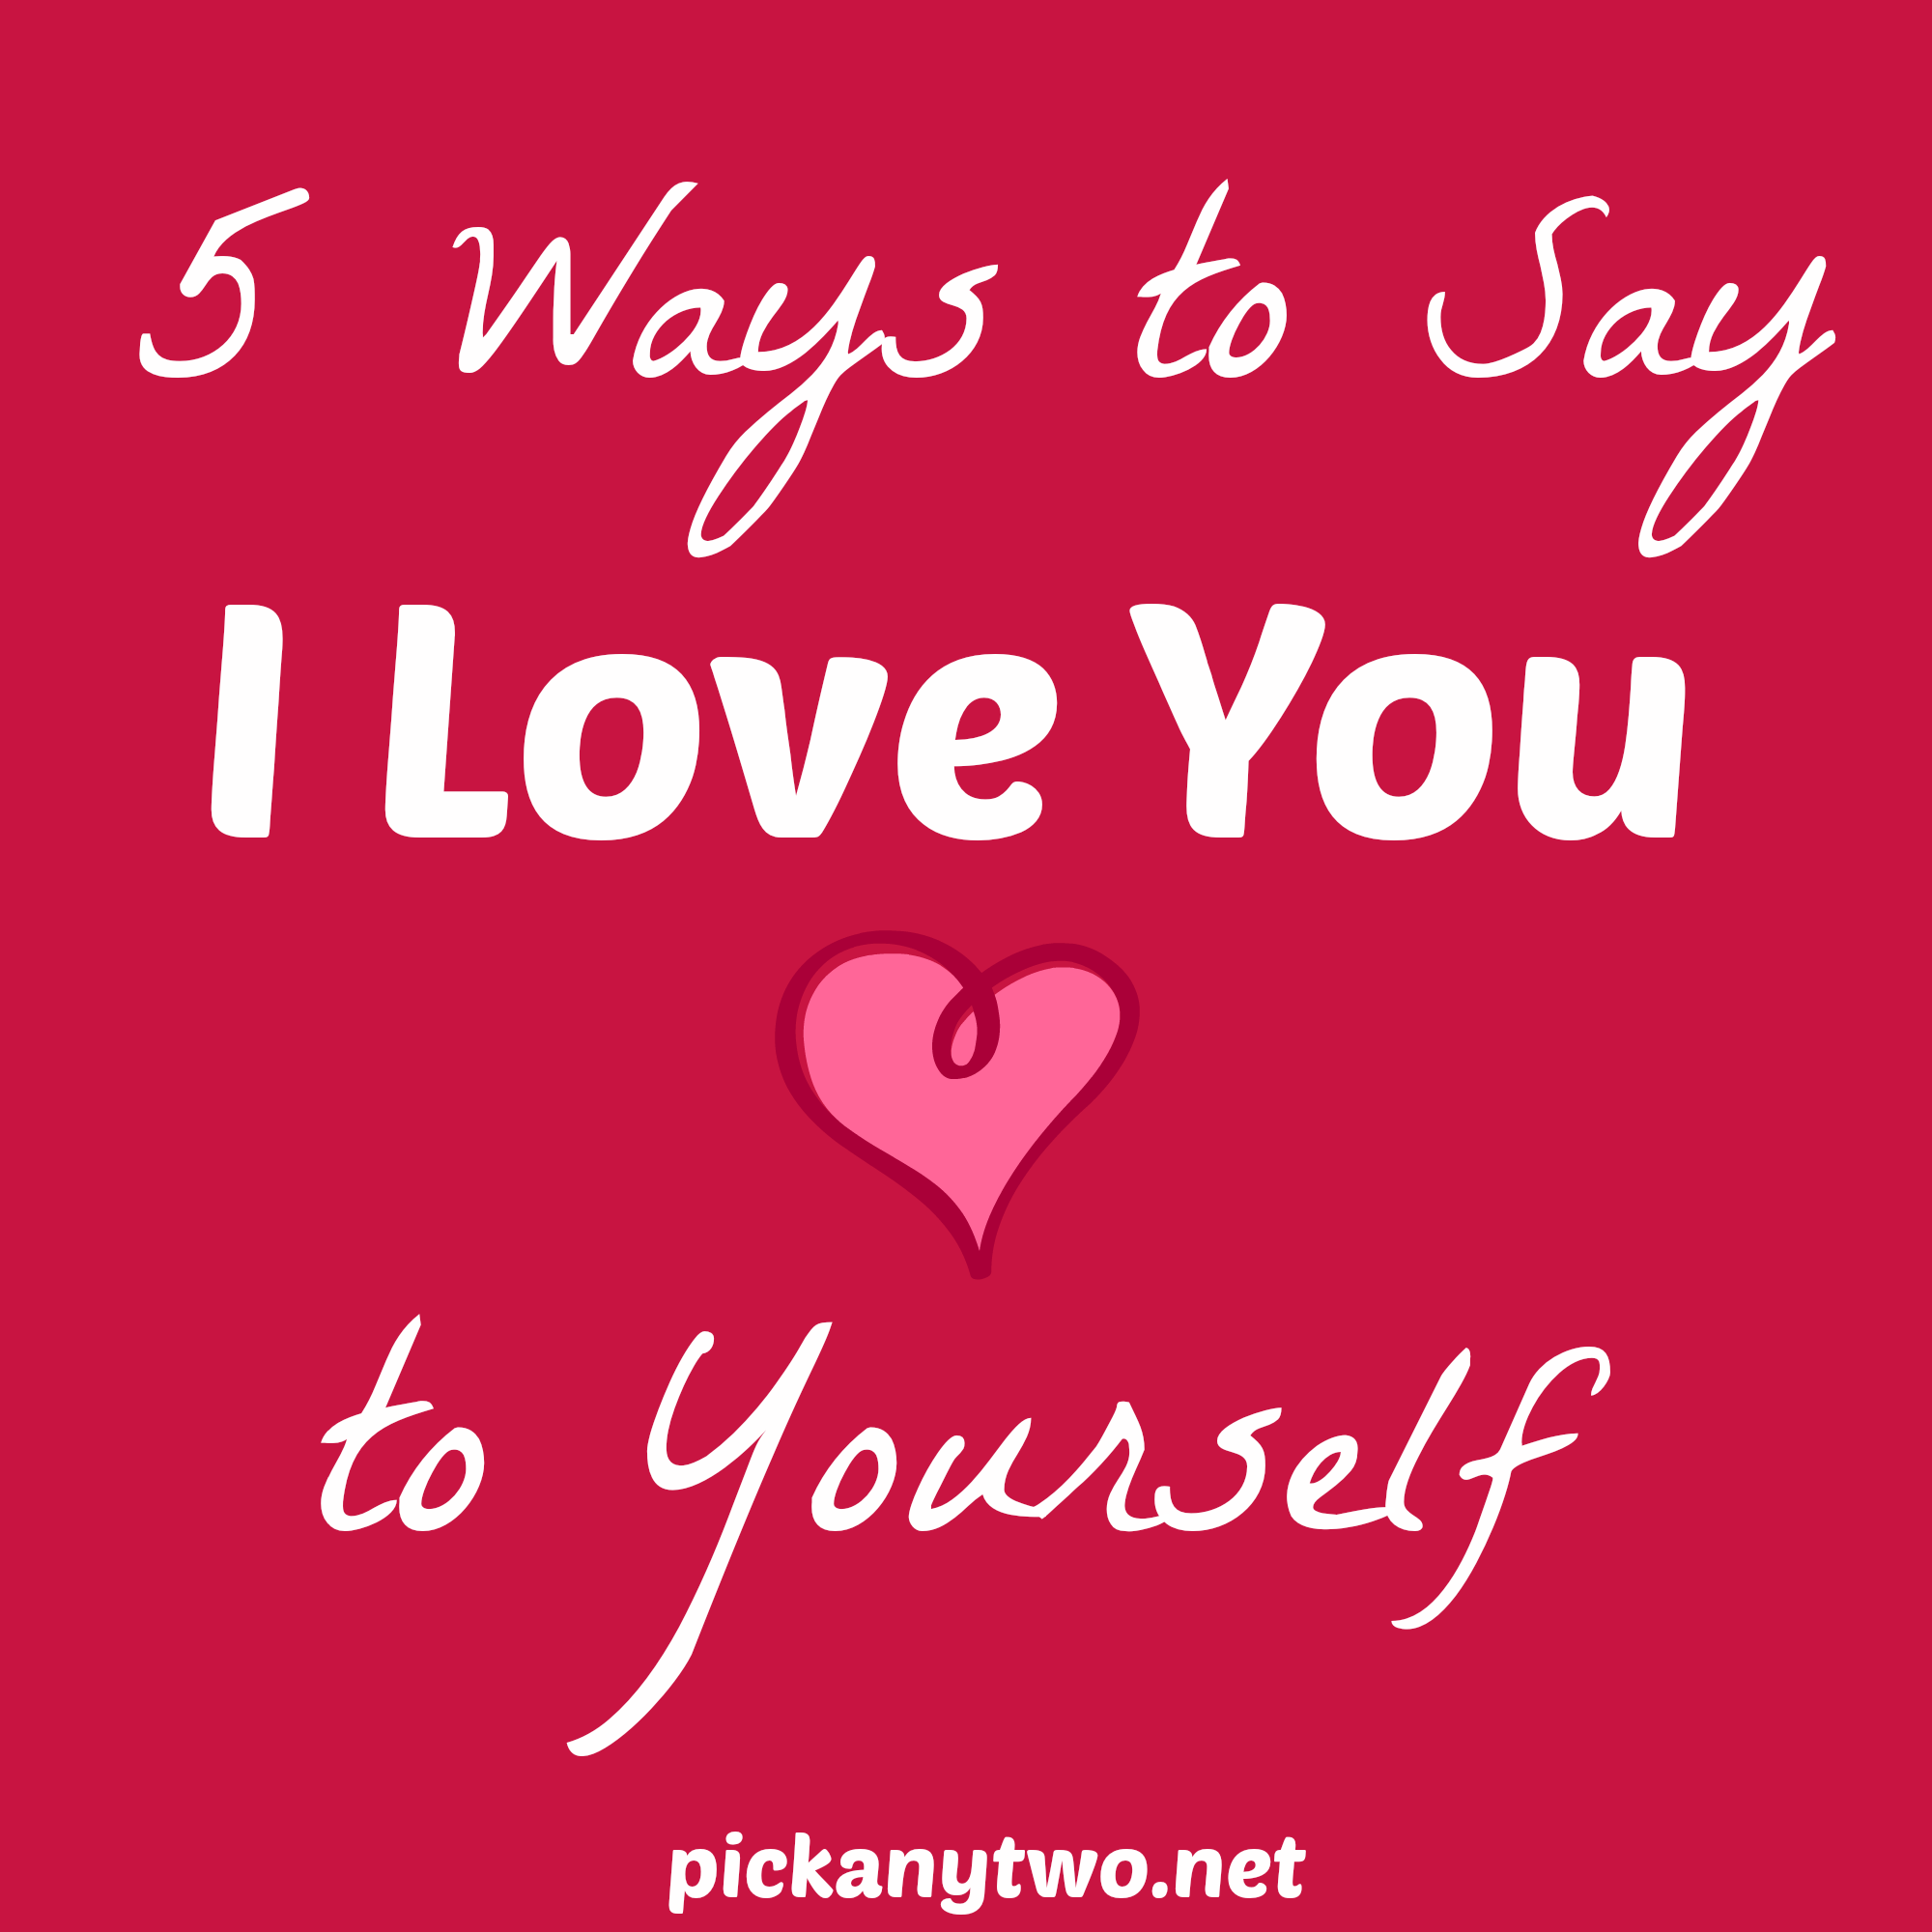 5 Ways to Say I Love You to Yourself